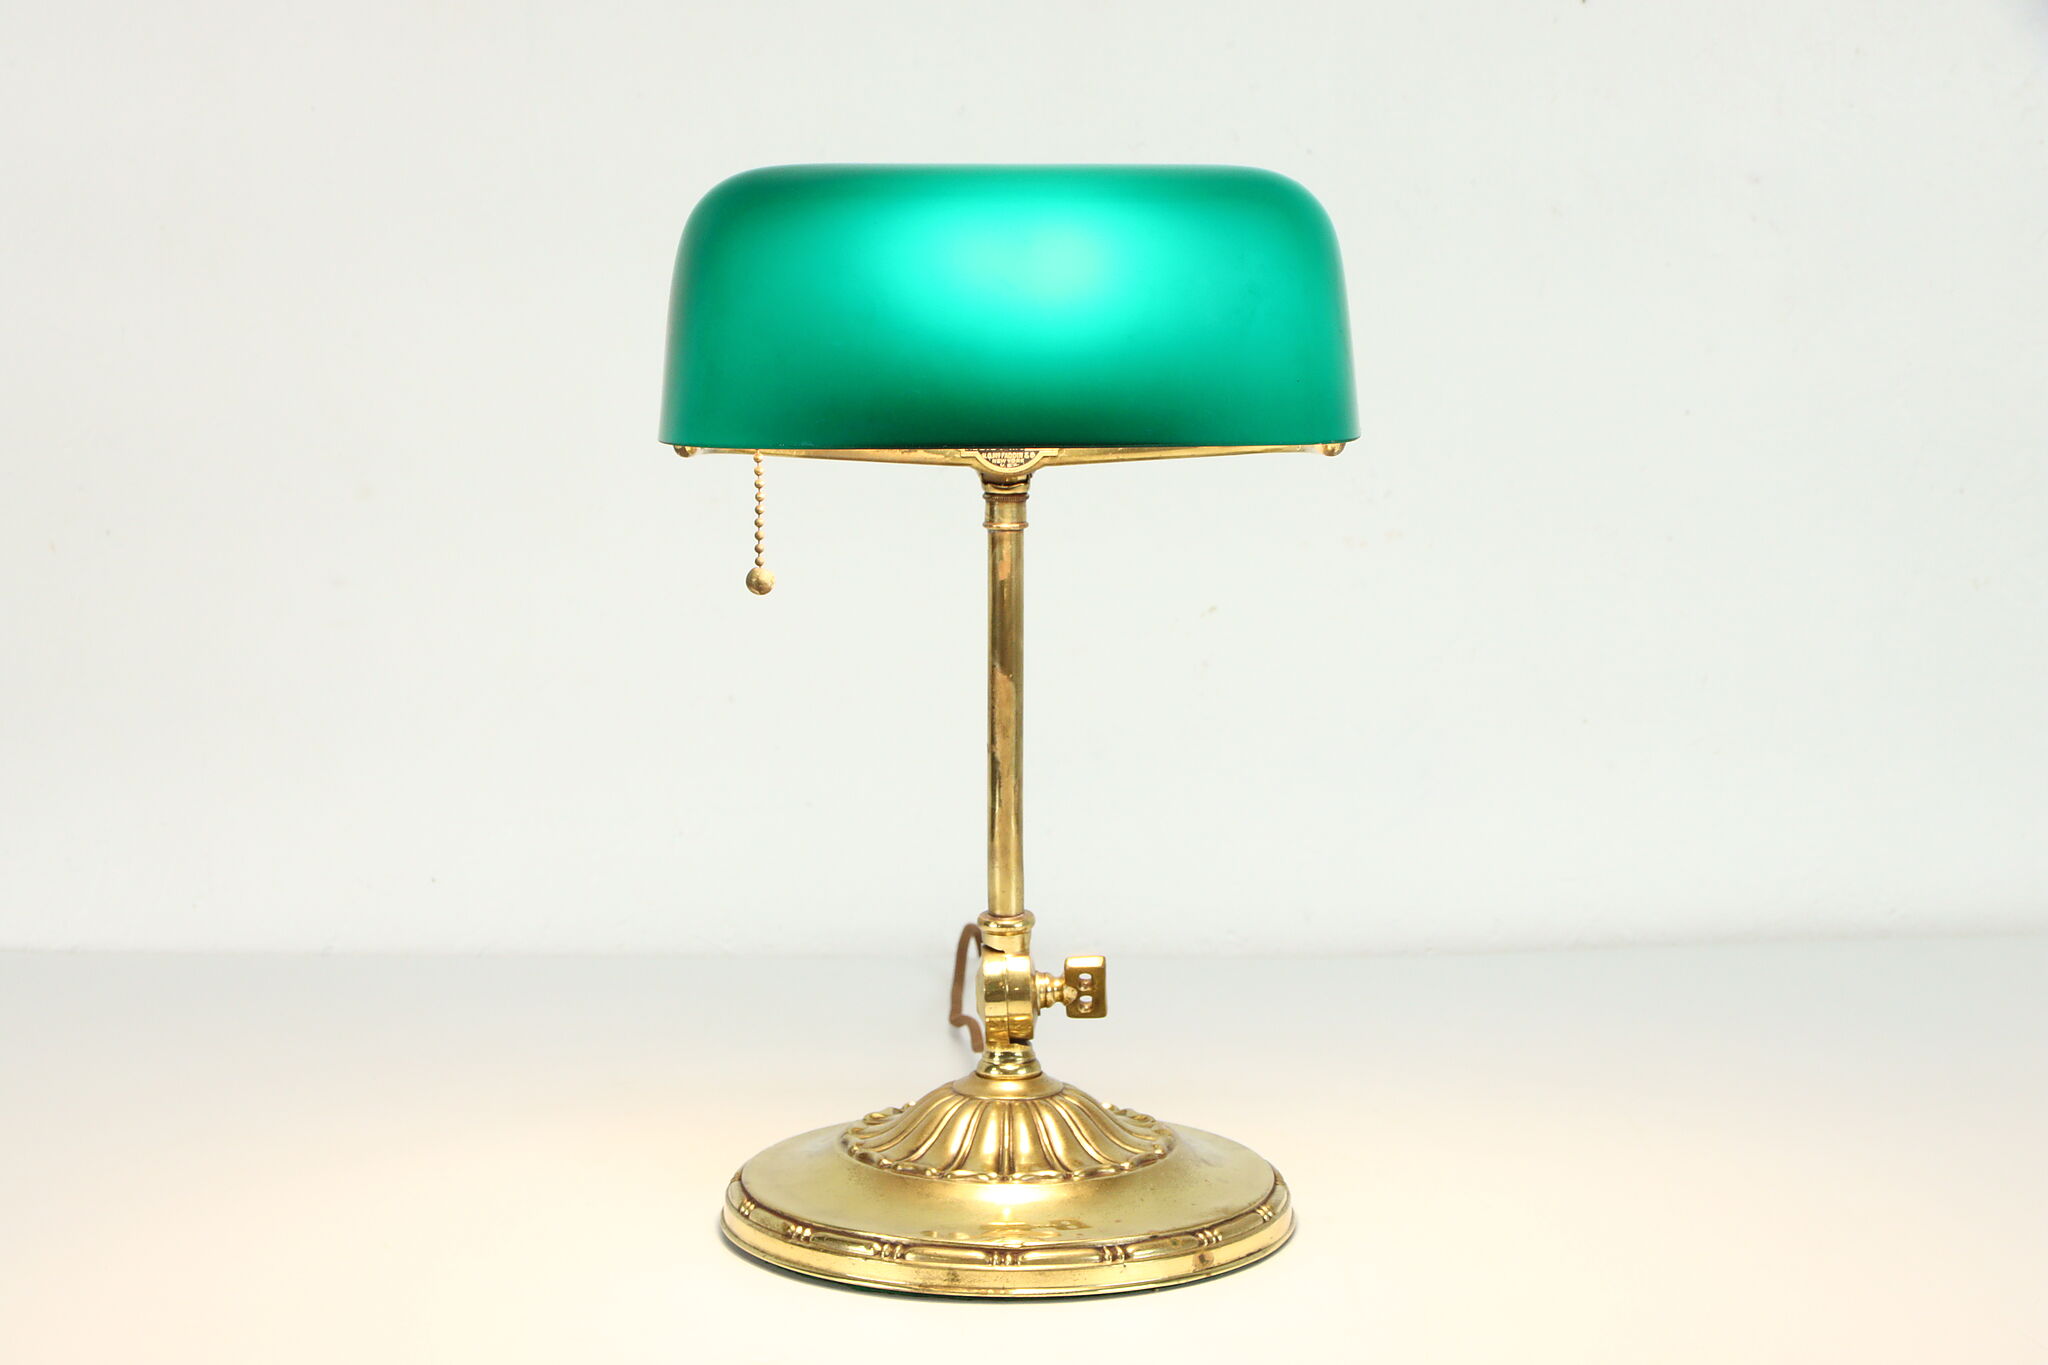 Cabinet Banker Lamp Vintage Look Green Glass Shade, Great Decor for Home  and Office Interiors